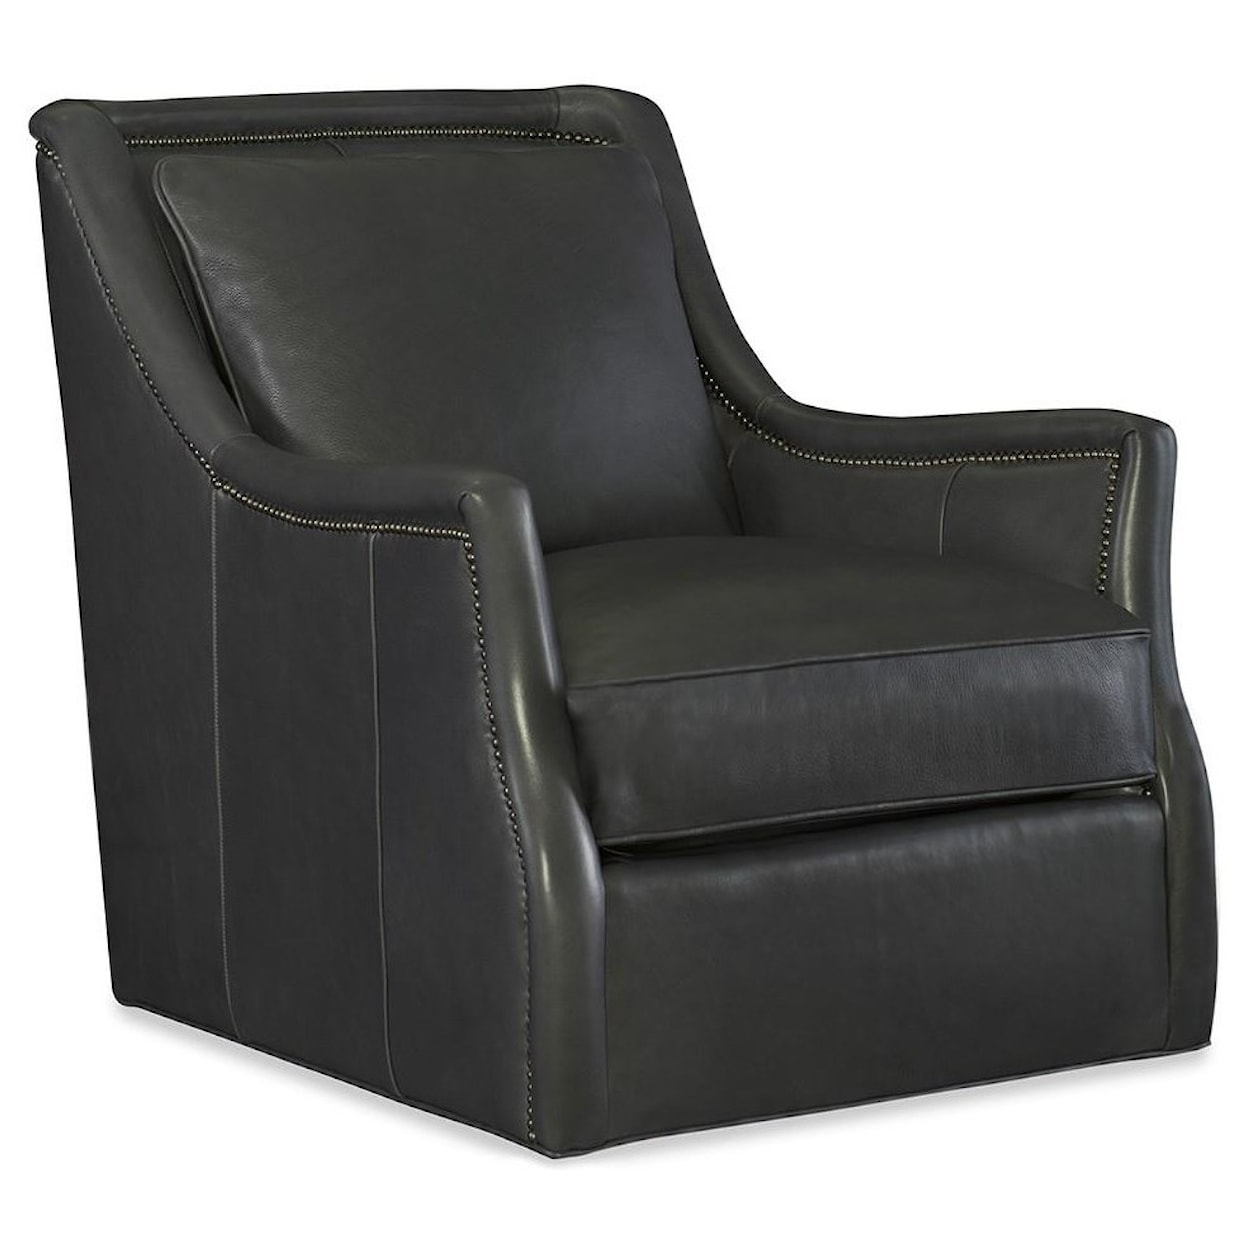 C.R. Laine Marcoux Marcoux Leather Swivel Chair